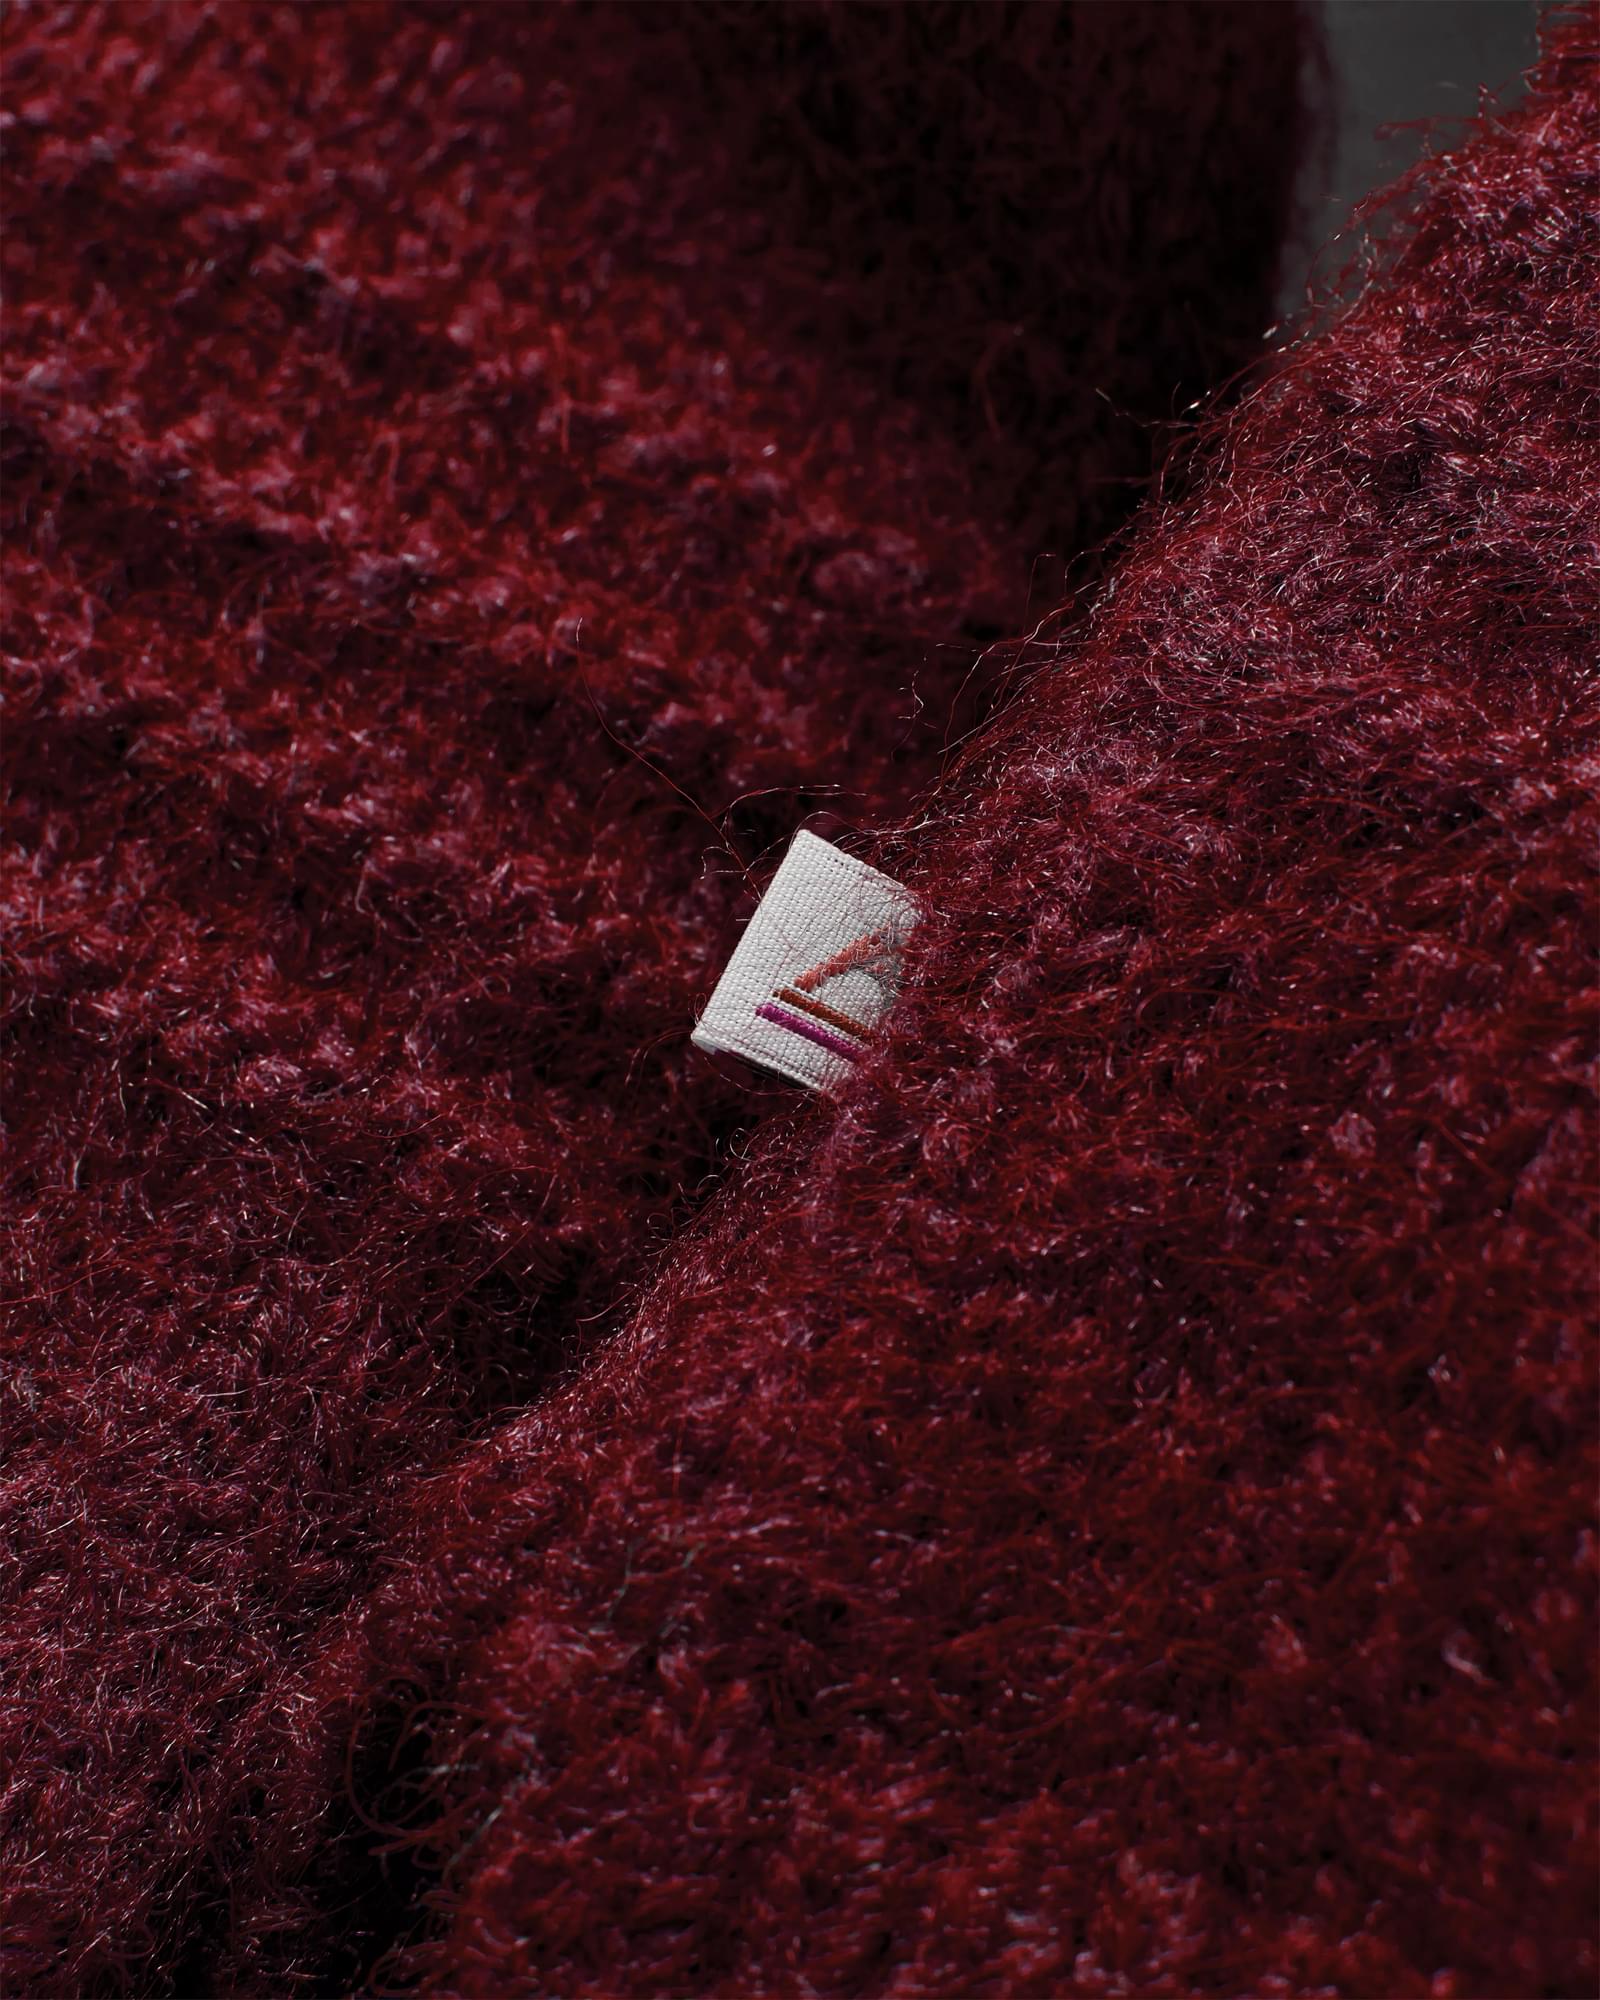 Snug Recycled Polo Neck Knitted Jumper - Wine